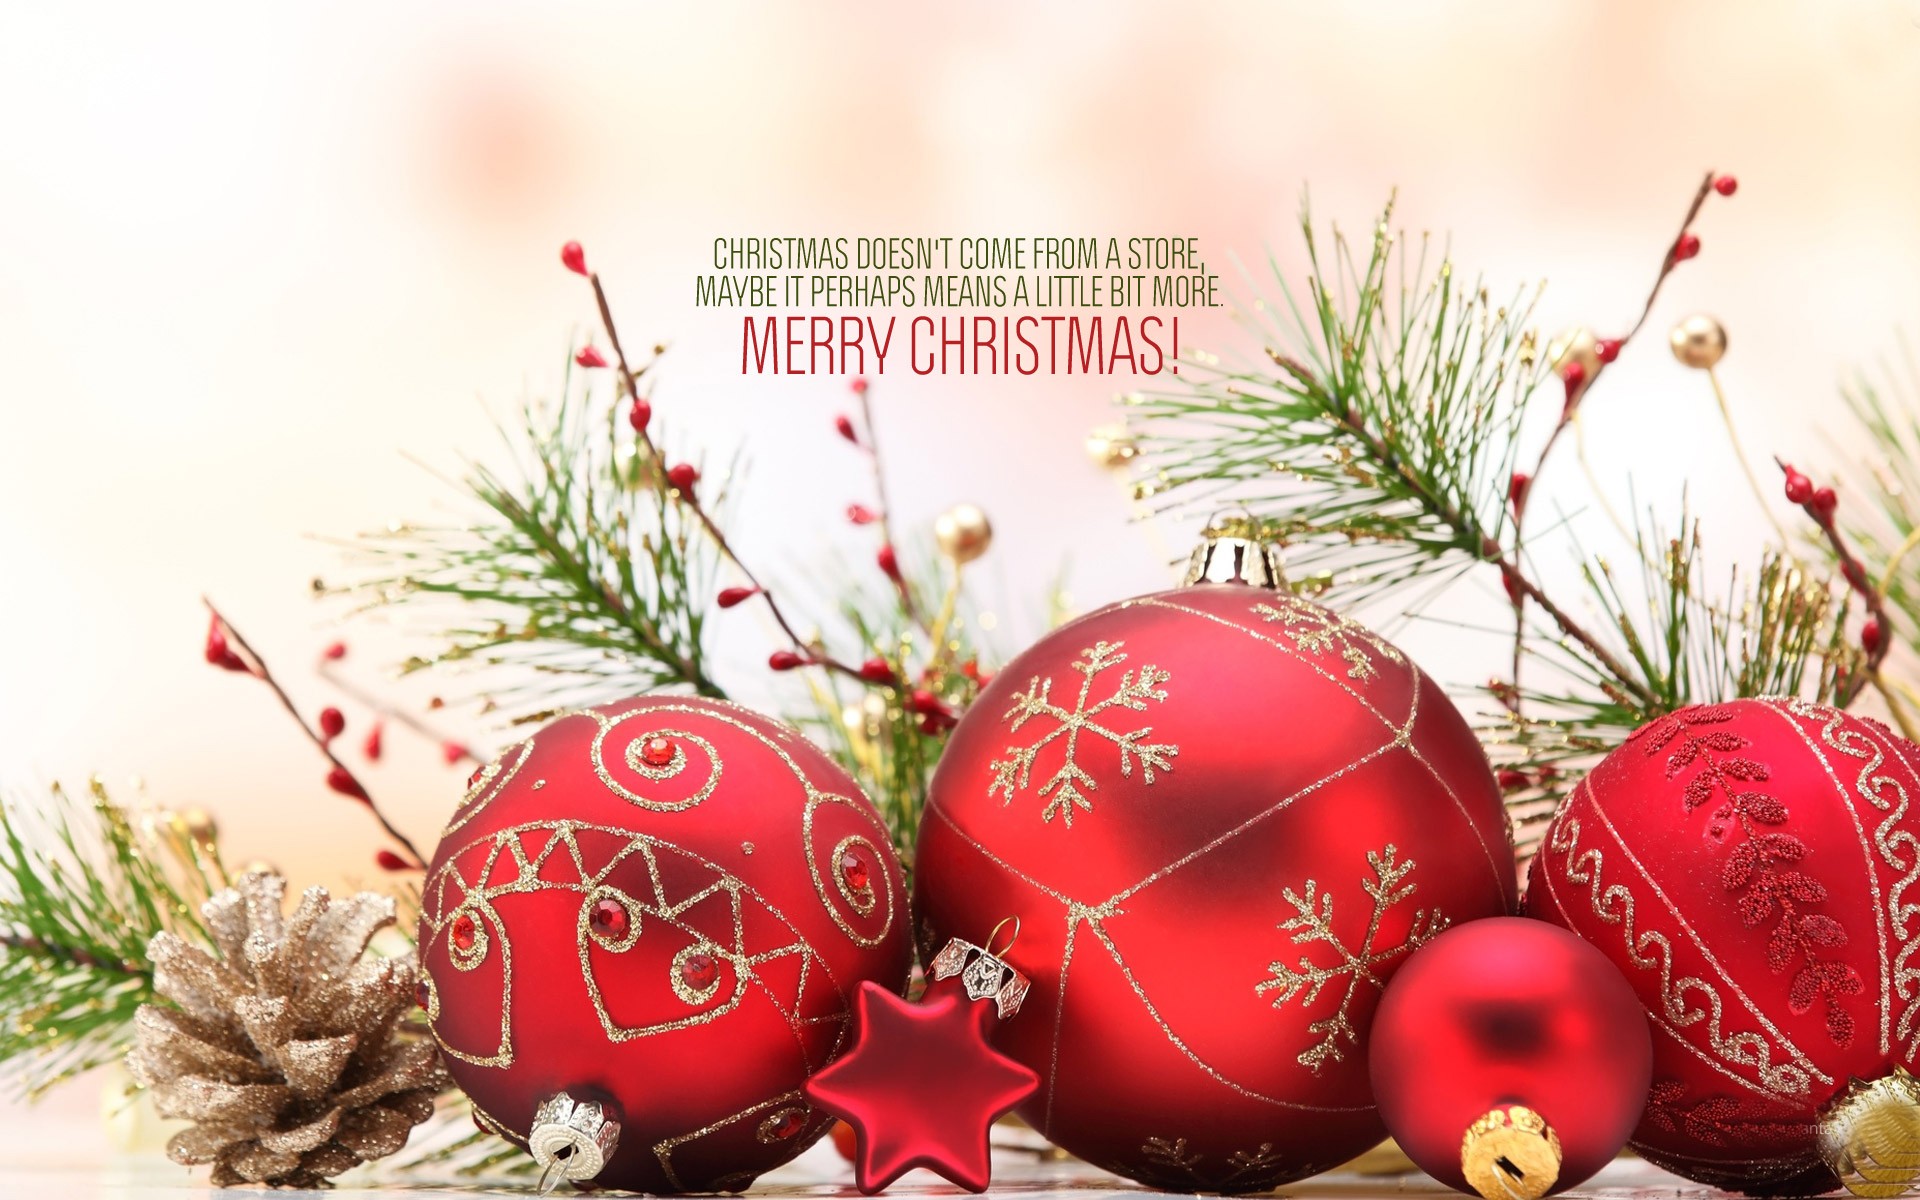 Merry Christmas Wishes 2017 - HD Wallpaper 